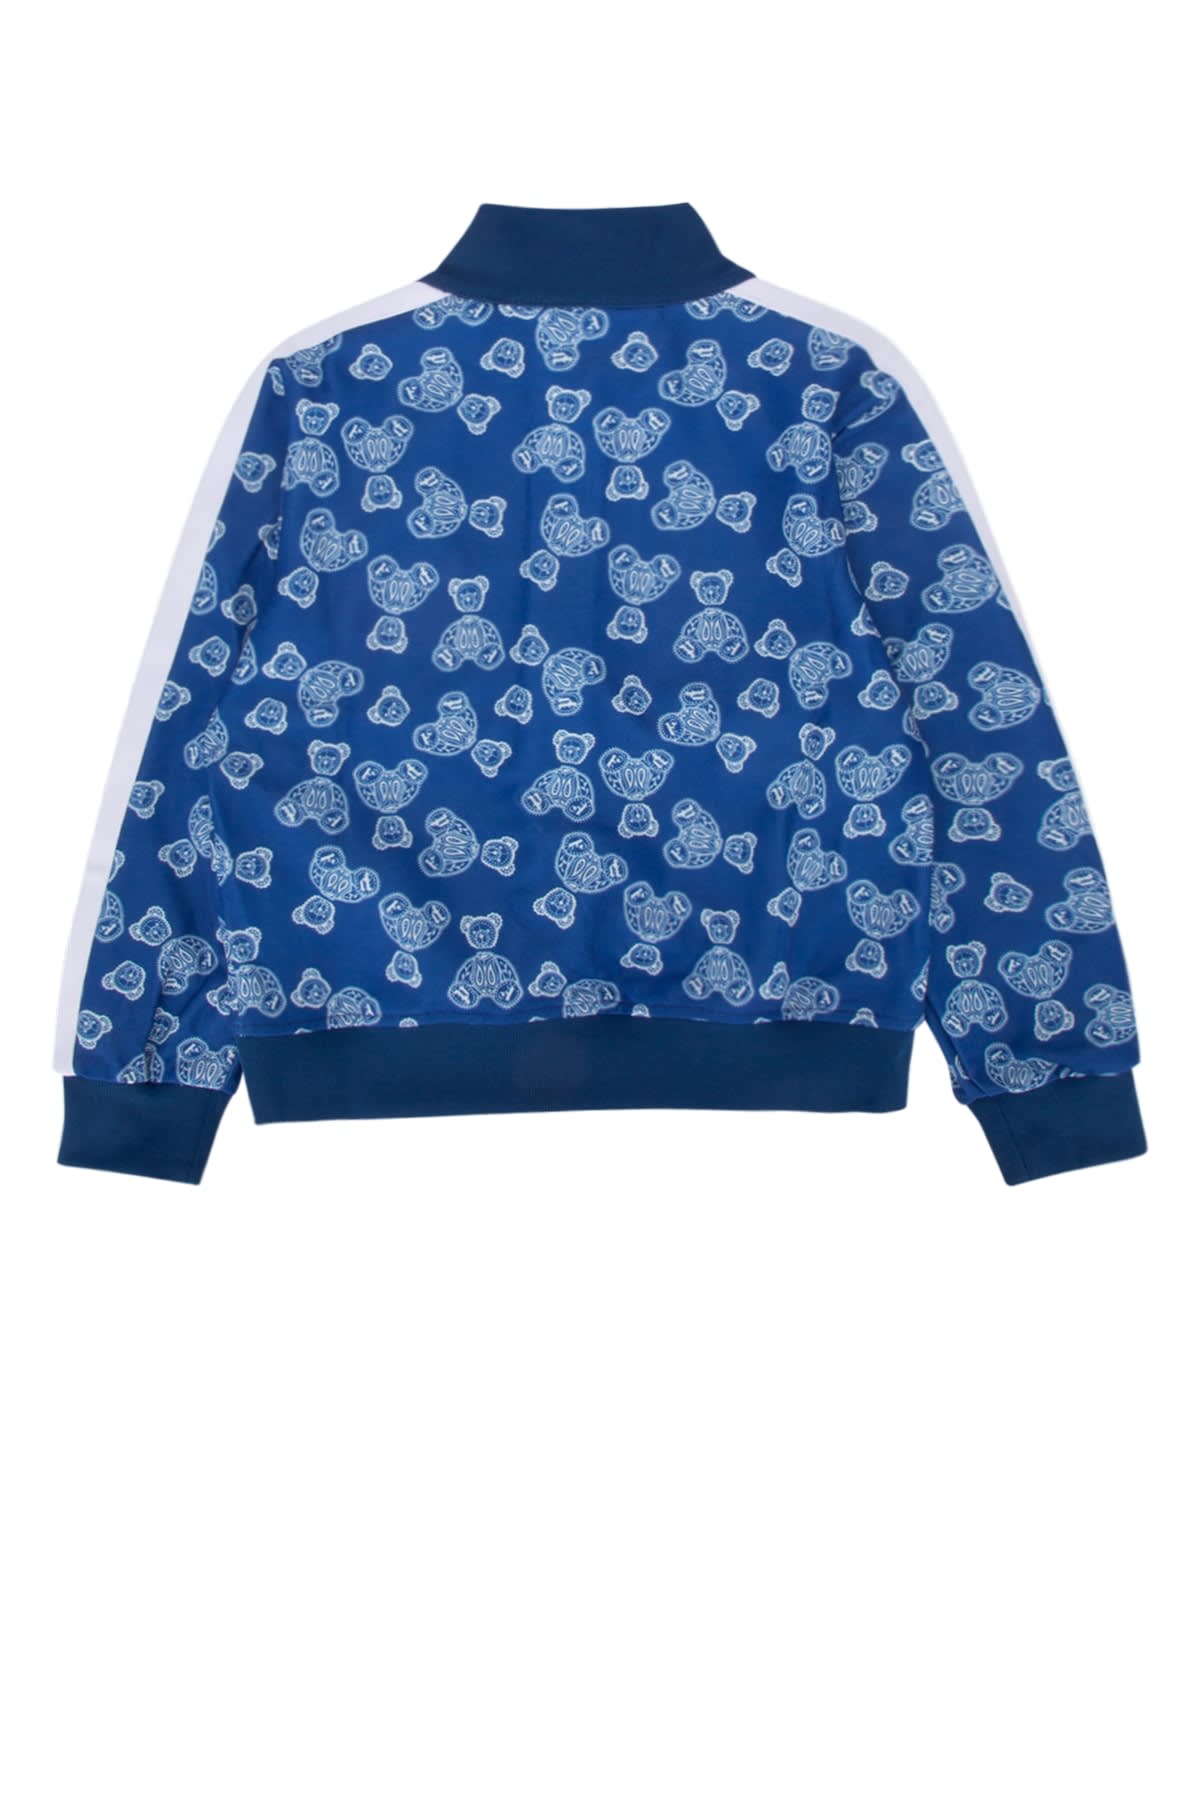 Palm Angels Kids' Maglione In Blueoffw